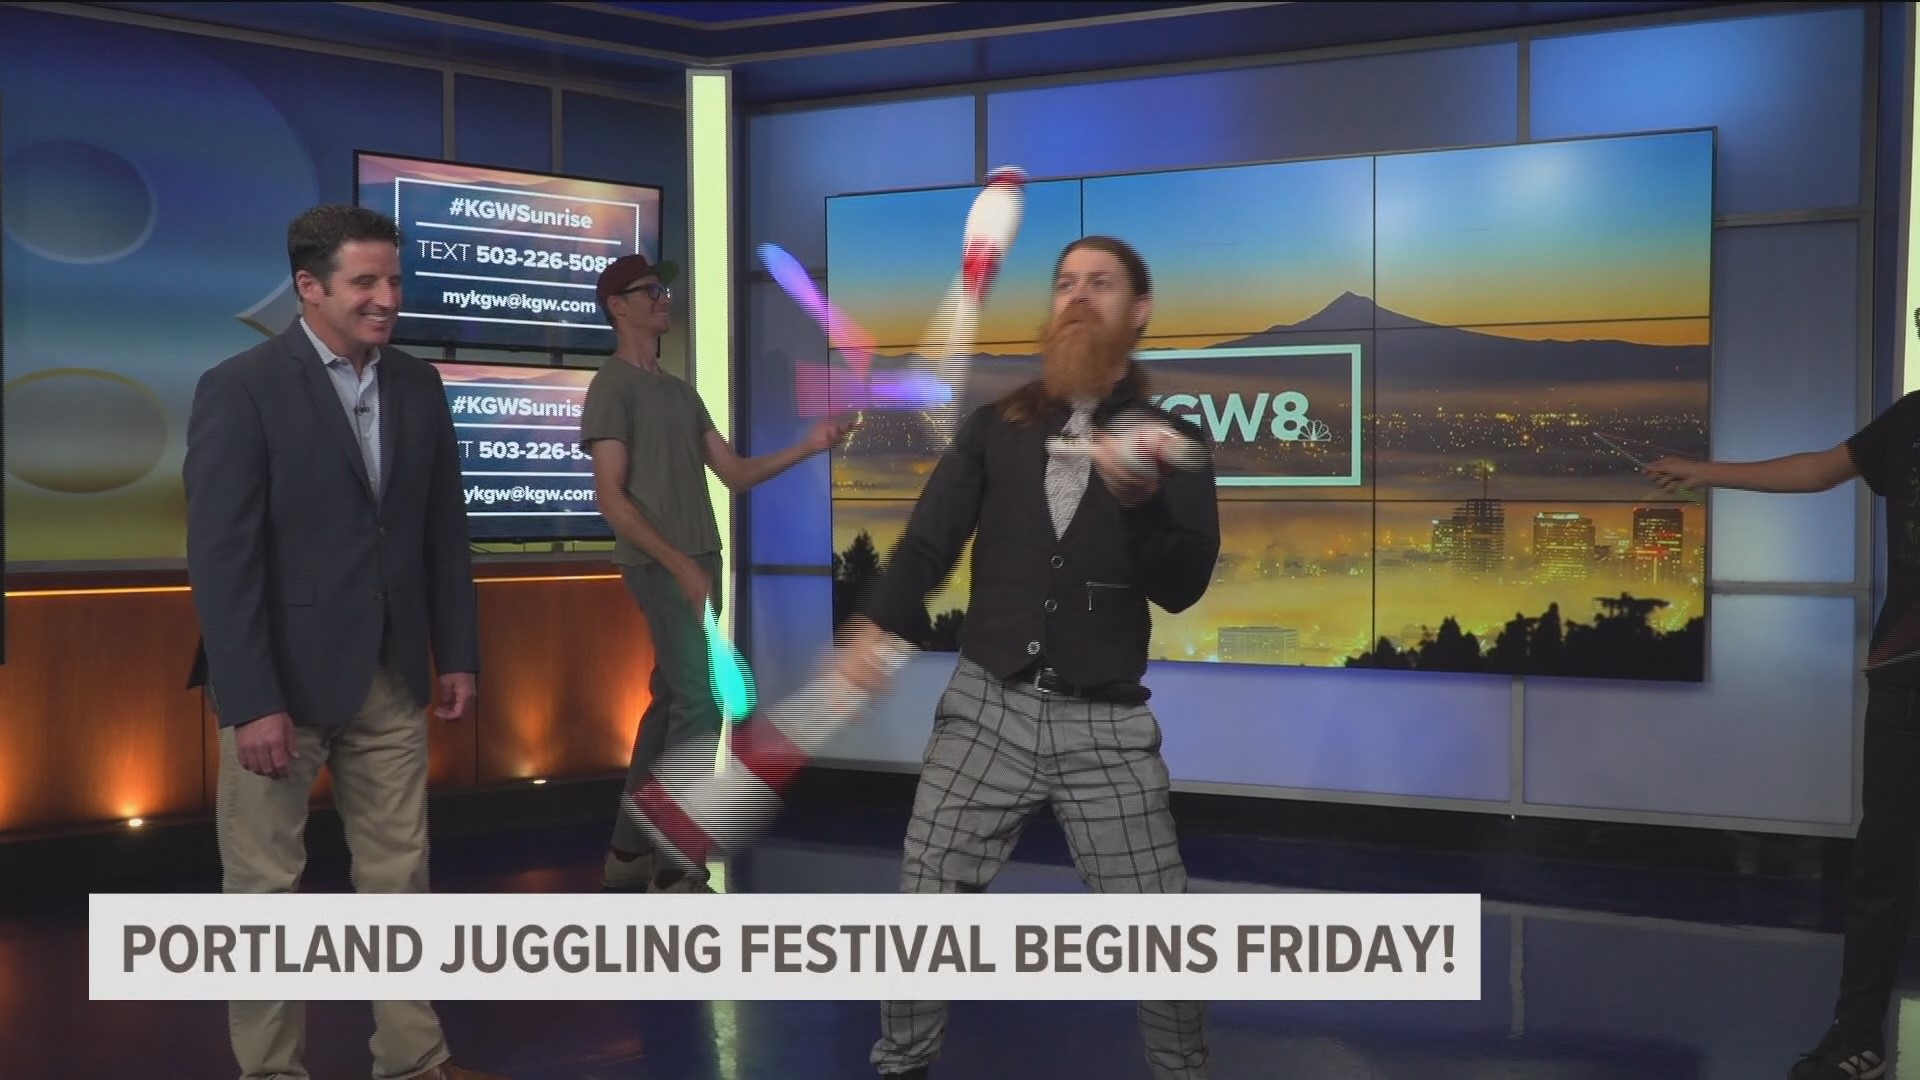 The 31st annual Portland Juggling Festival will bring three days of workshops, games and entertainment! It runs Sept. 15-17.